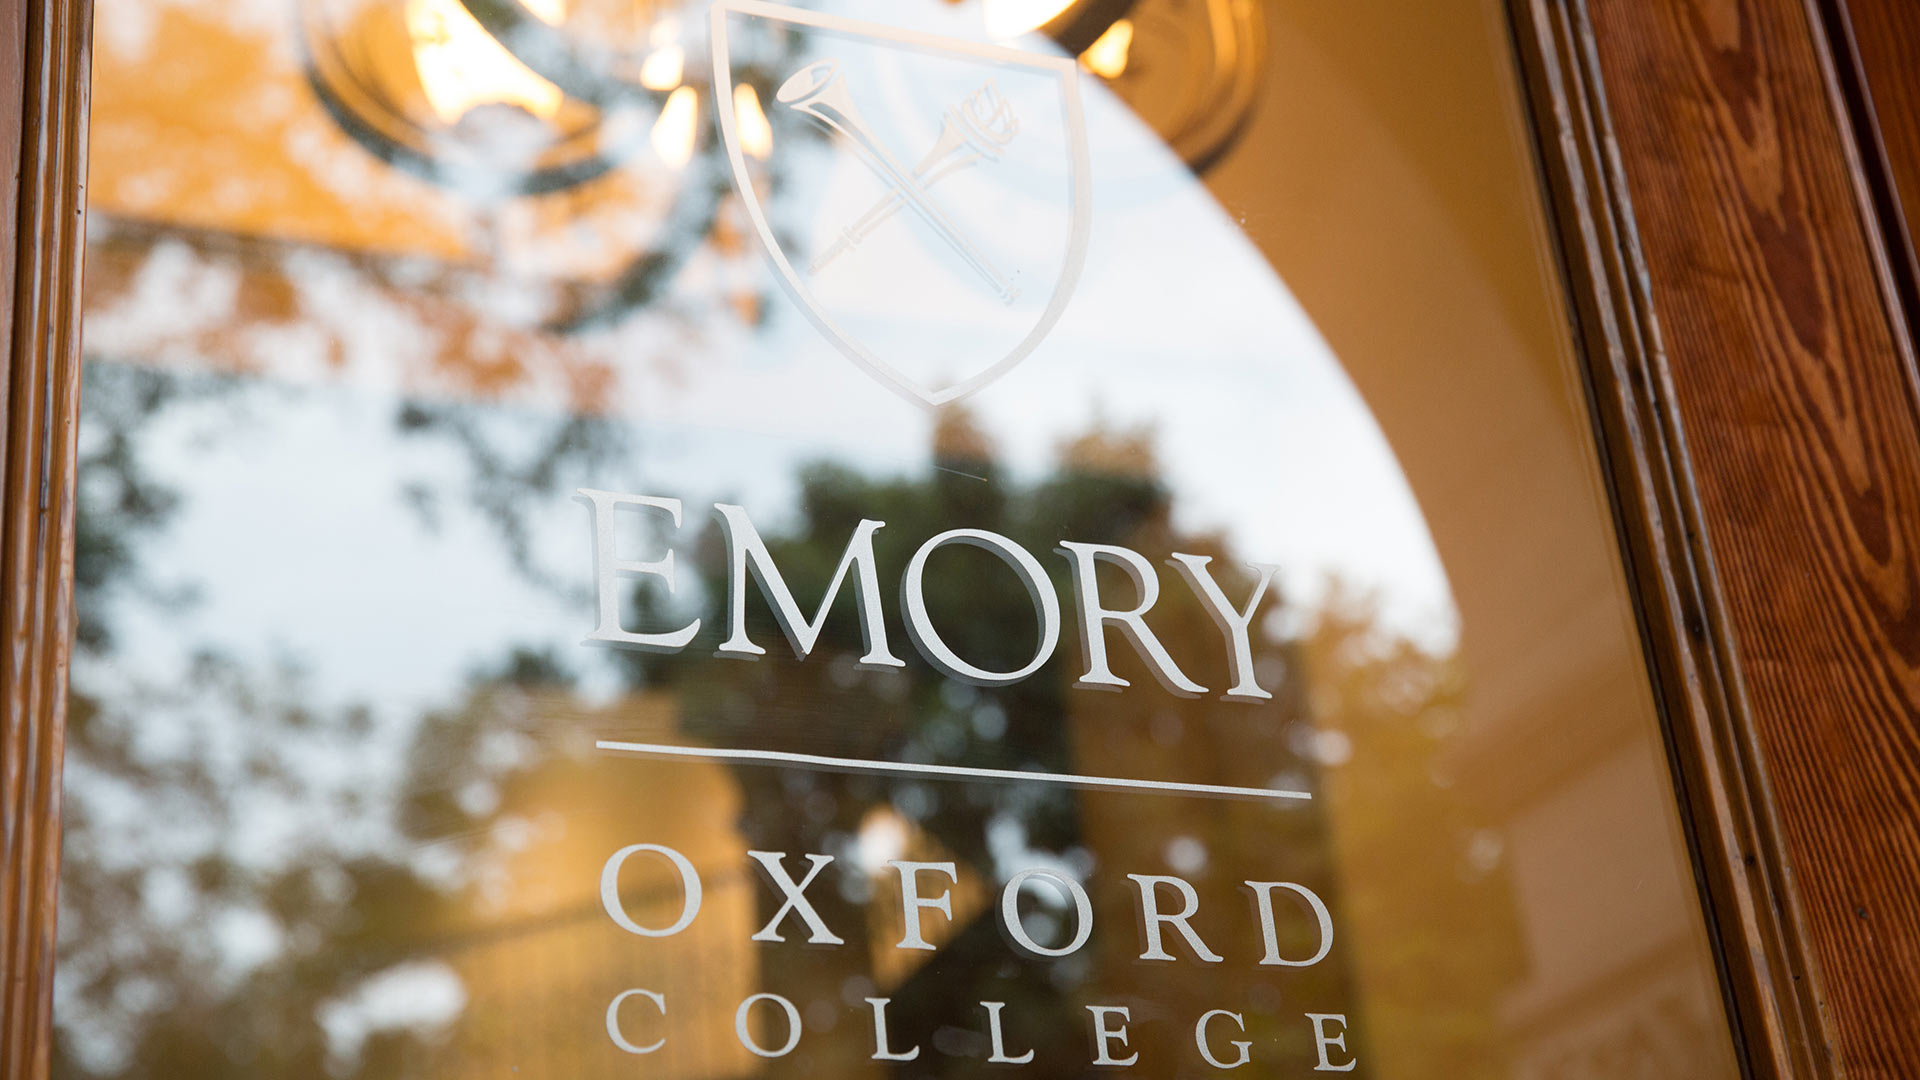 Emory established a fund designed to support our students facing financial hardships as a result of COVID-19